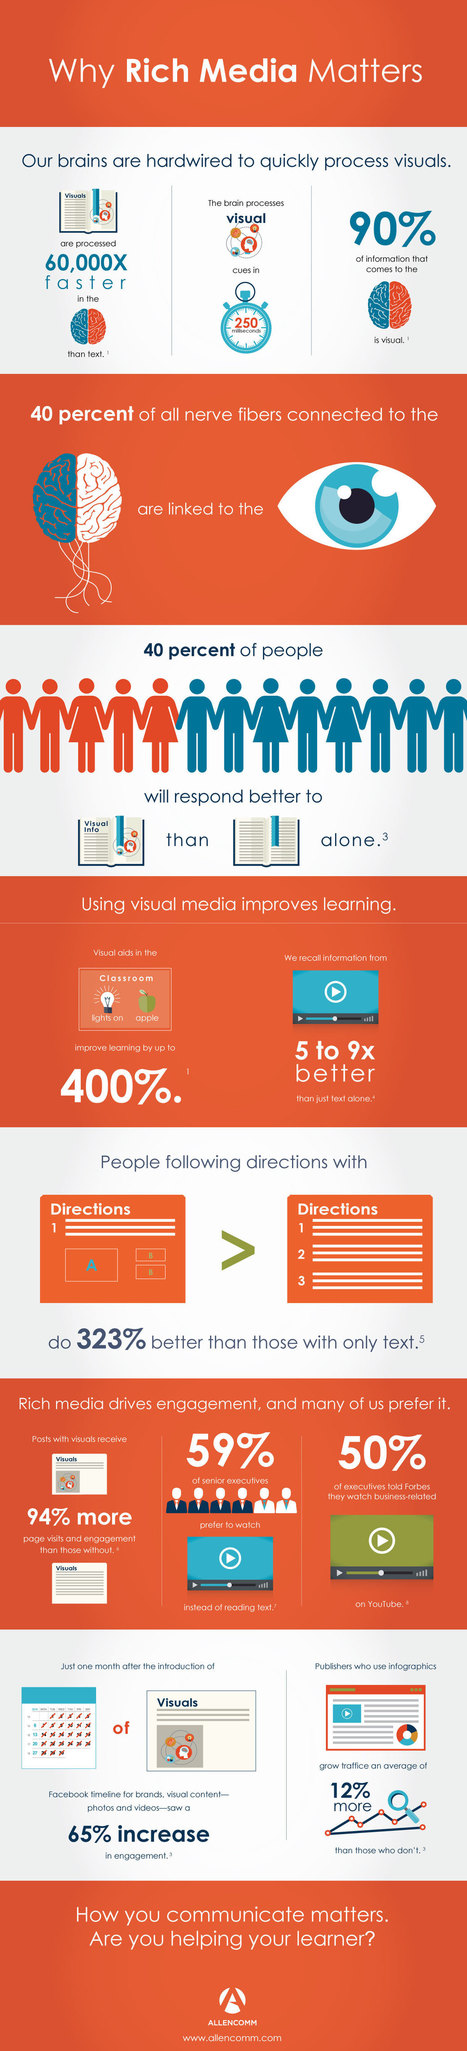 Boosting Learner Engagement with Rich Media Infographic | Infographic | 21st Century Learning and Teaching | Scoop.it